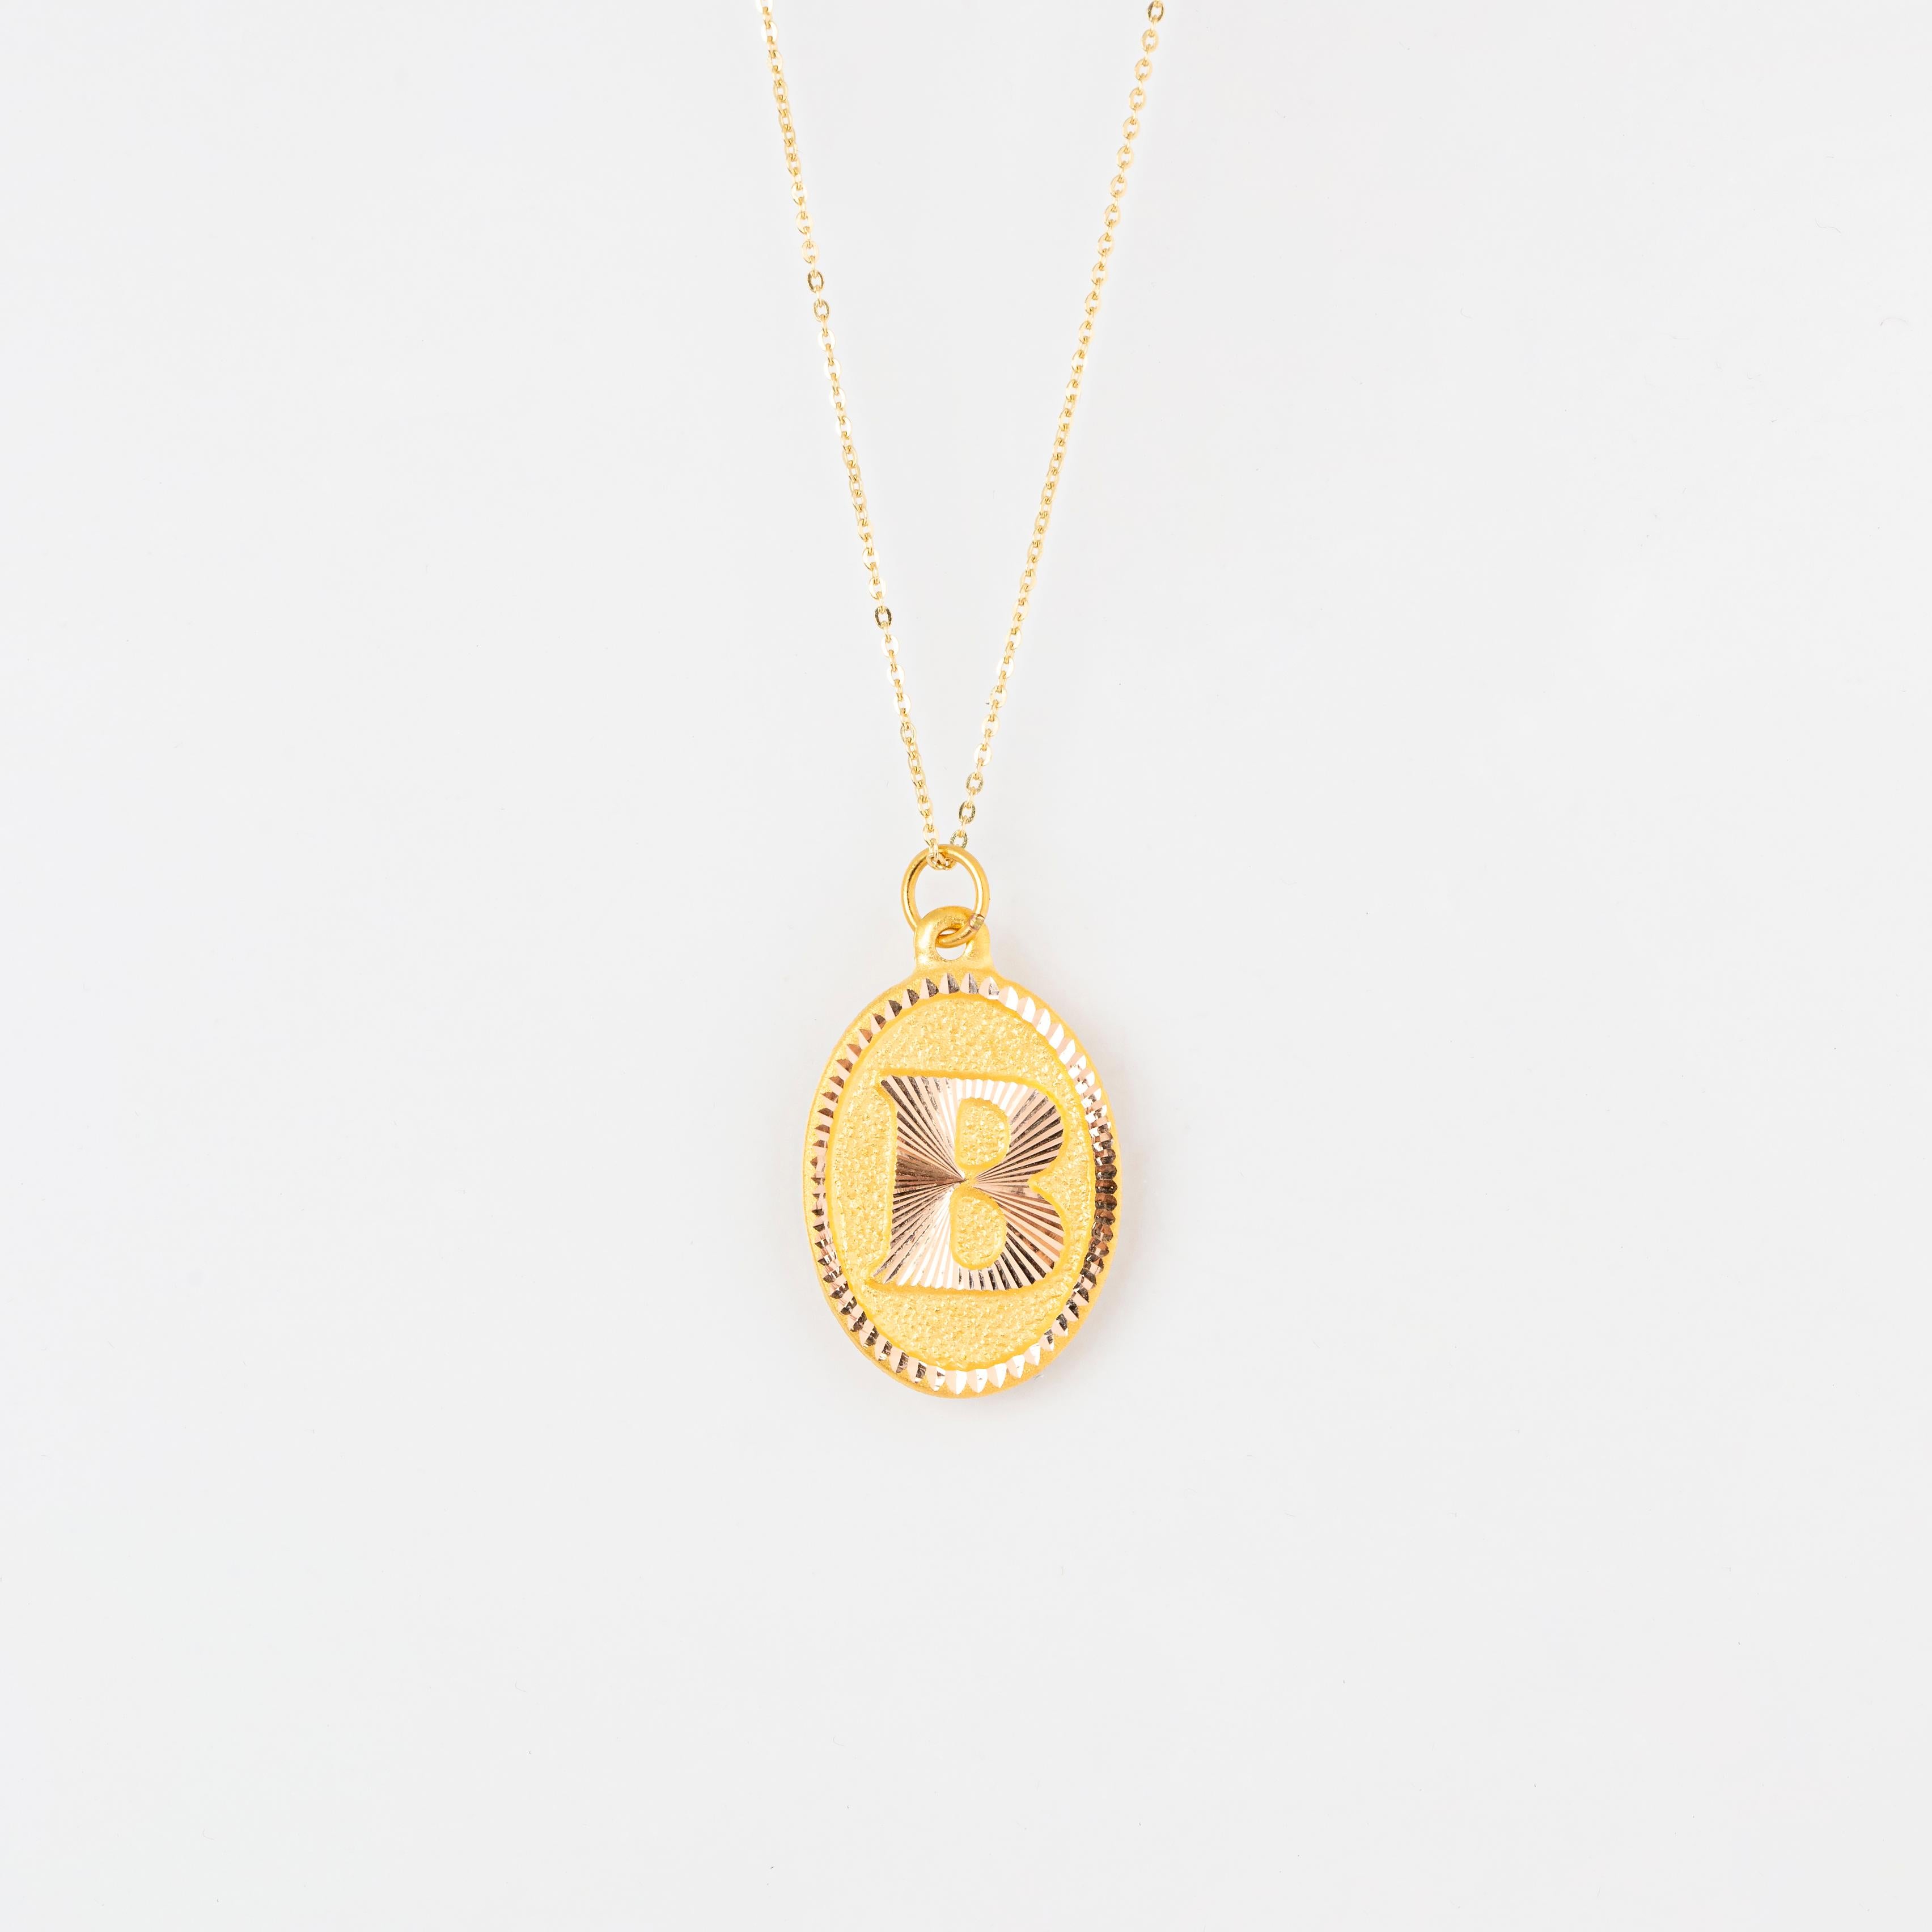 14K Gold Necklaces, Letter Necklace Models, Letter B Gold Necklace-Gift Necklace Models, Daily Necklaces, Letter Jewelry

It's a manual labor product. 'Handmade'. Fashionable product.

This necklace was made with quality materials and excellent